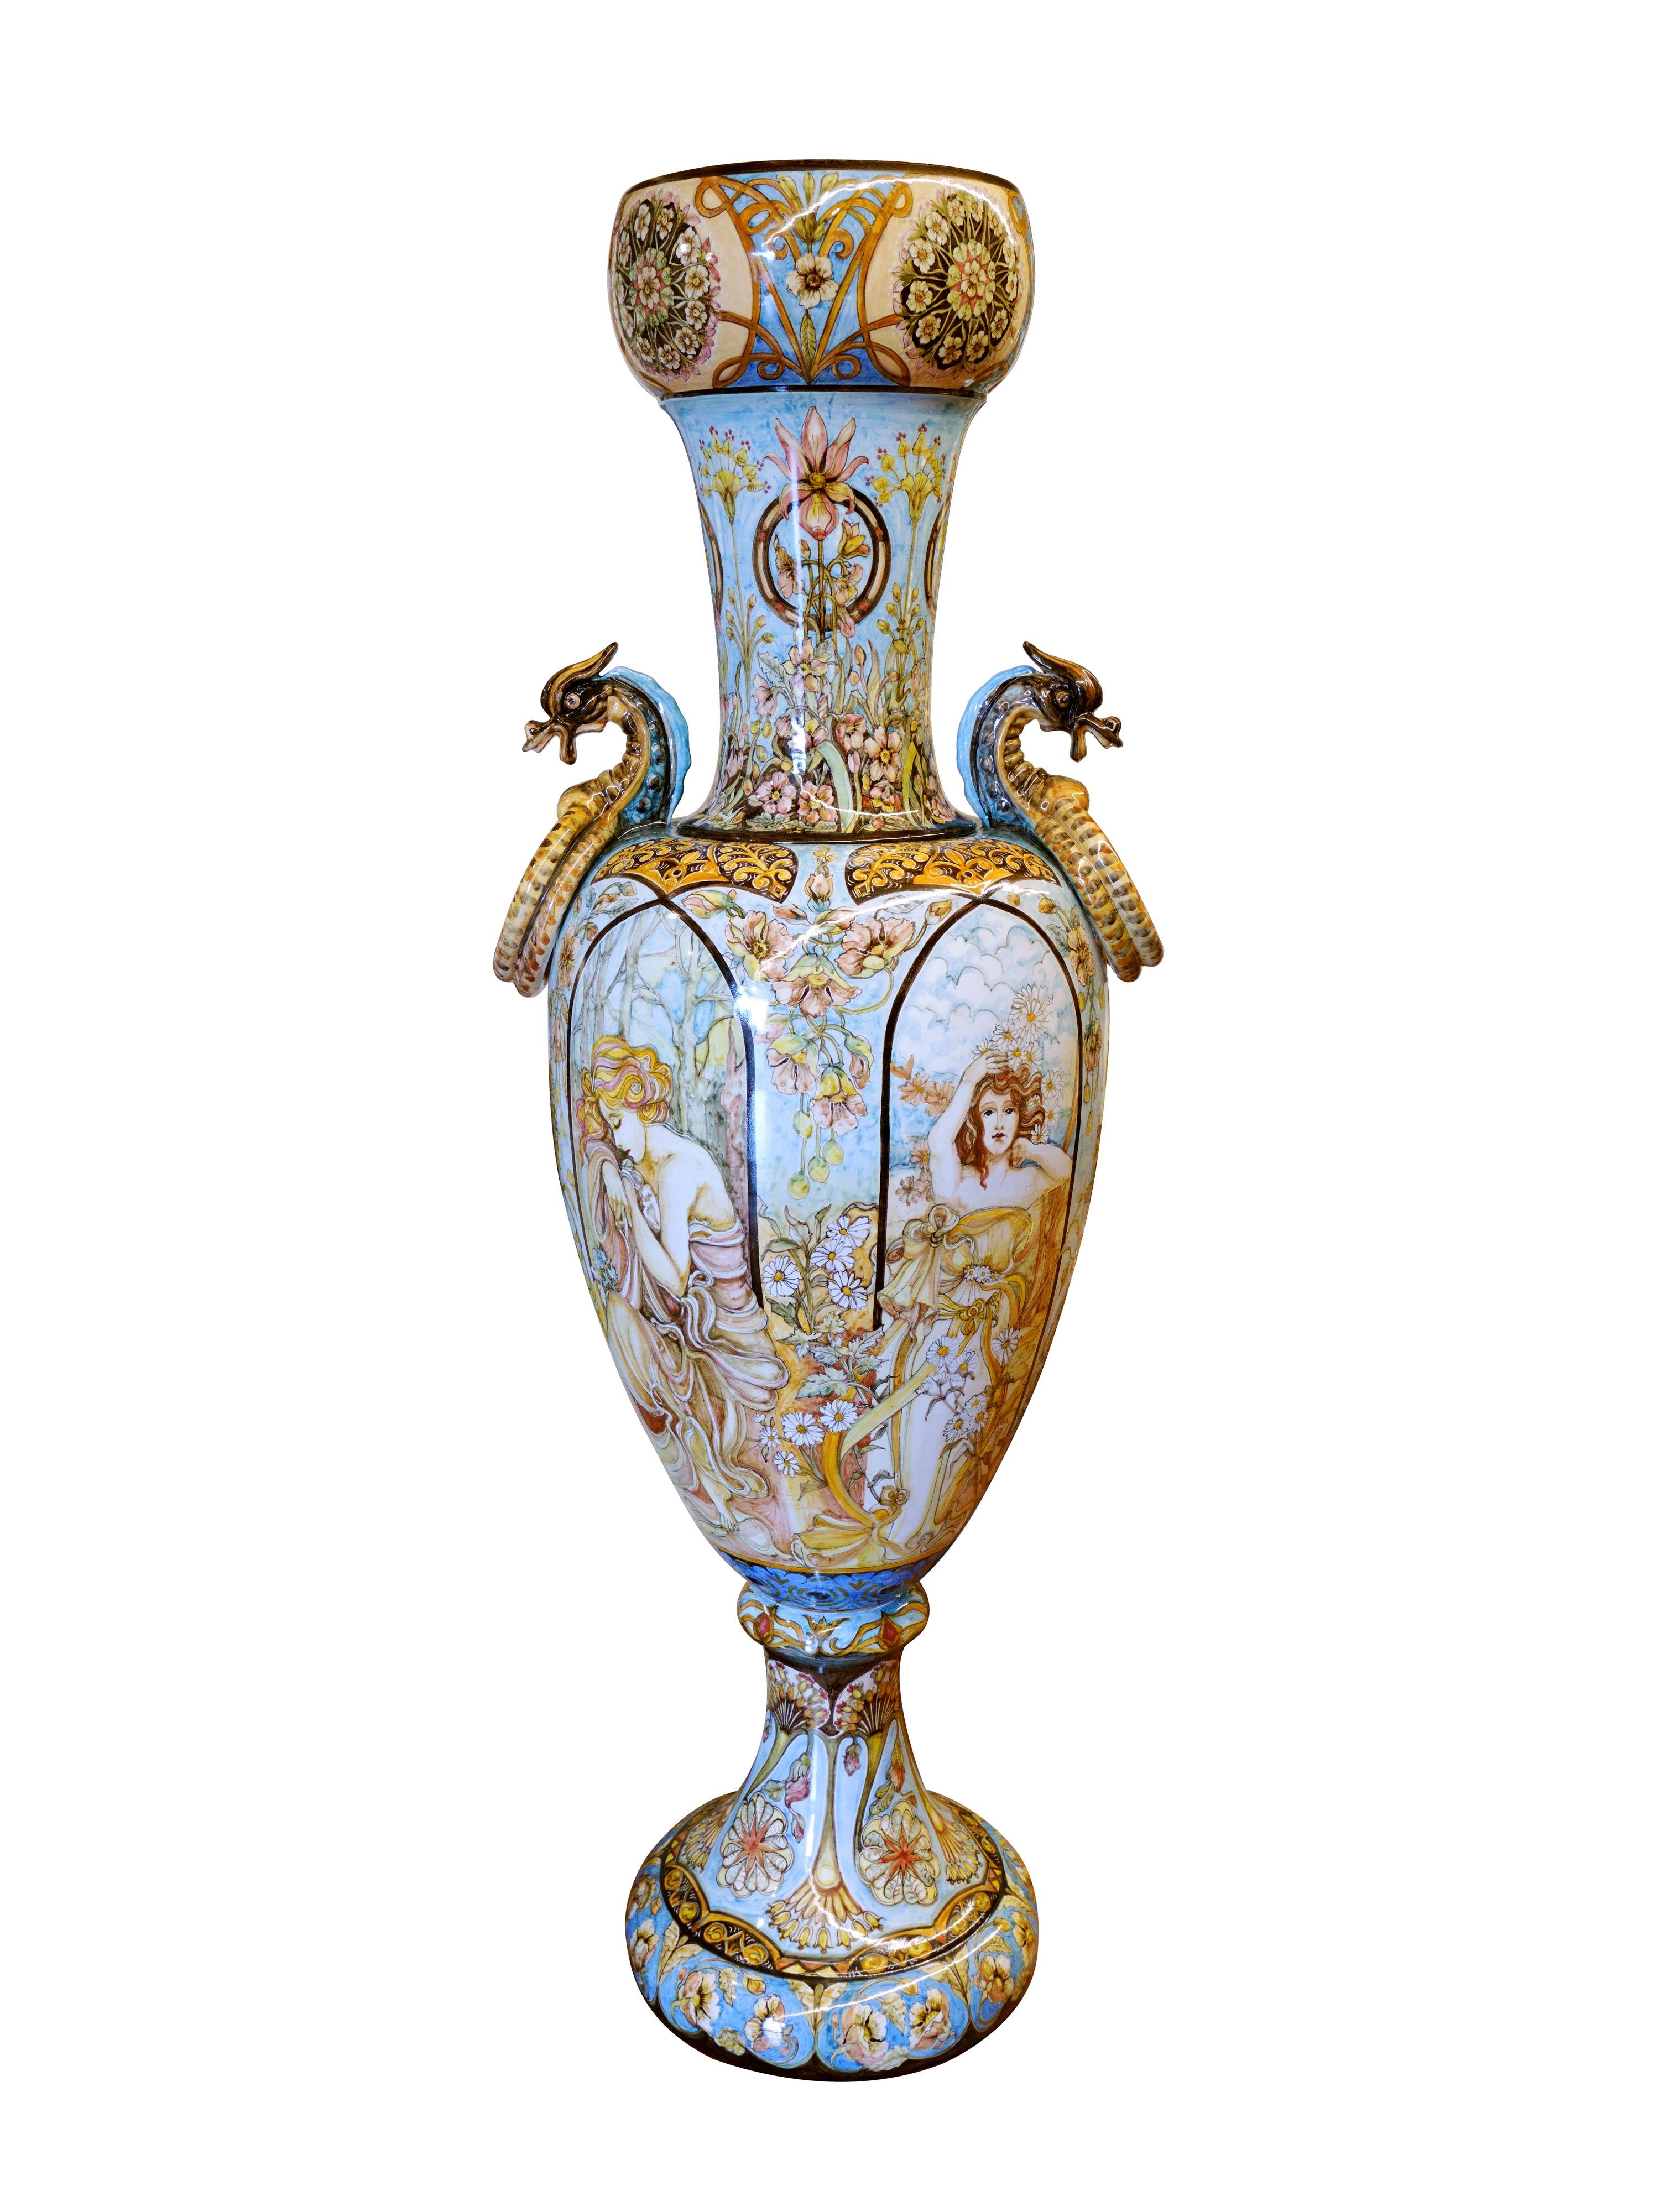 Majestic amphora in glazed majolica, handmade and hand painted in central Italy. On the amphora are represented, in great detail, the four seasons personified by graceful women surrounded by floral elements, all the decoration is in Art Nouveau